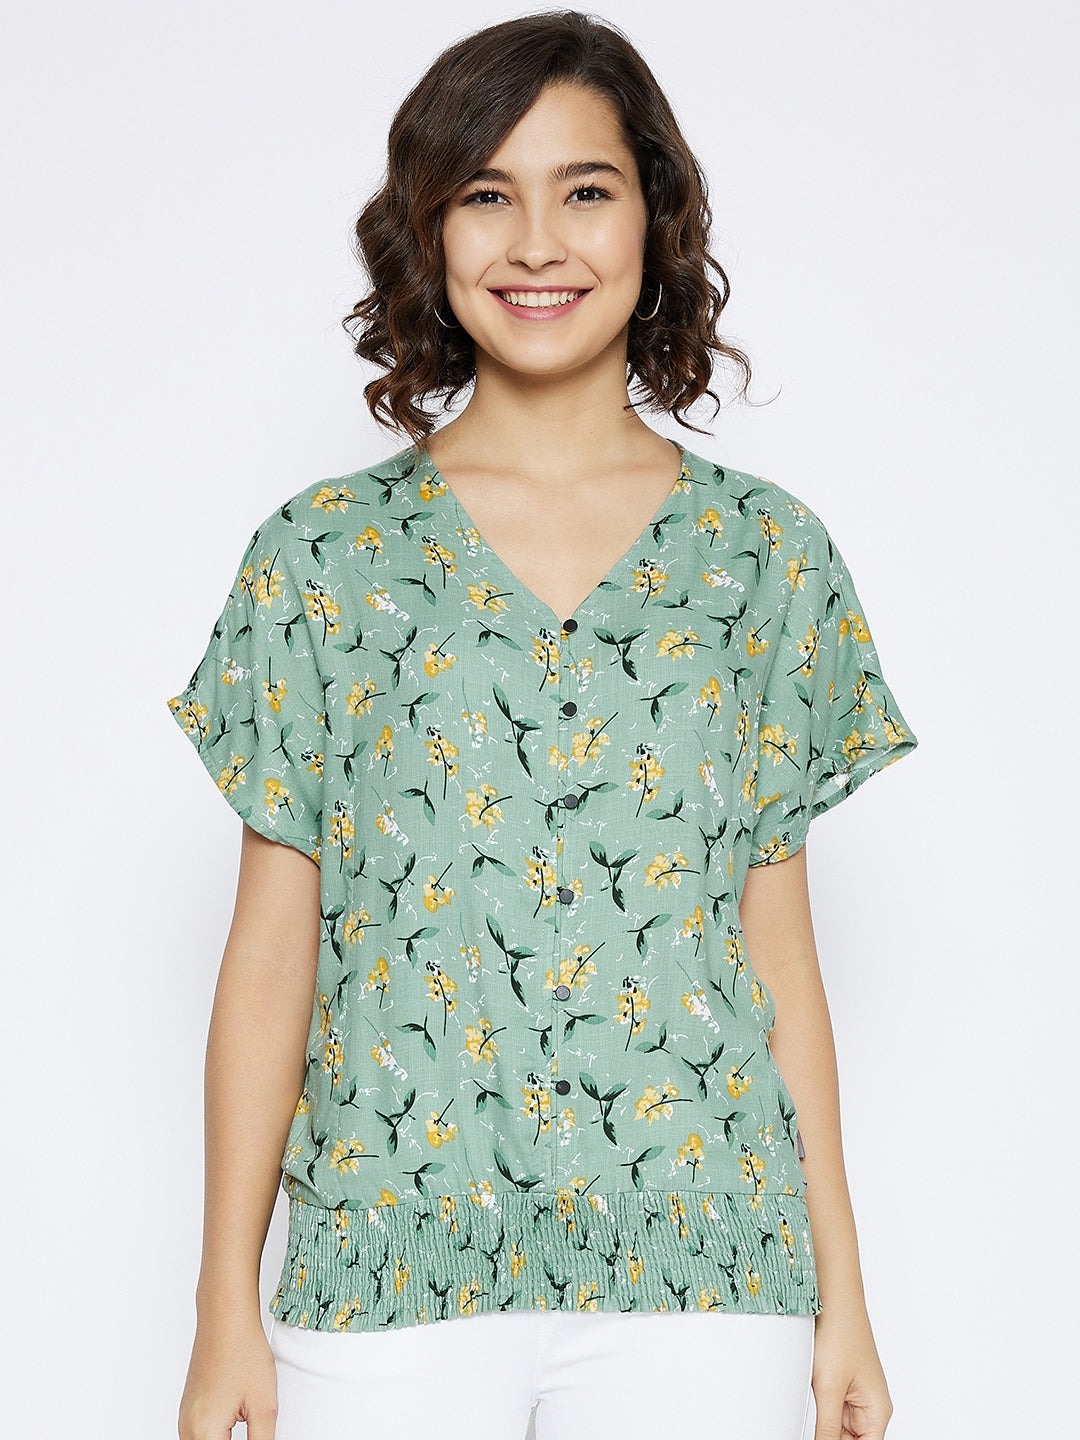 Green Floral Printed Top - Women Tops